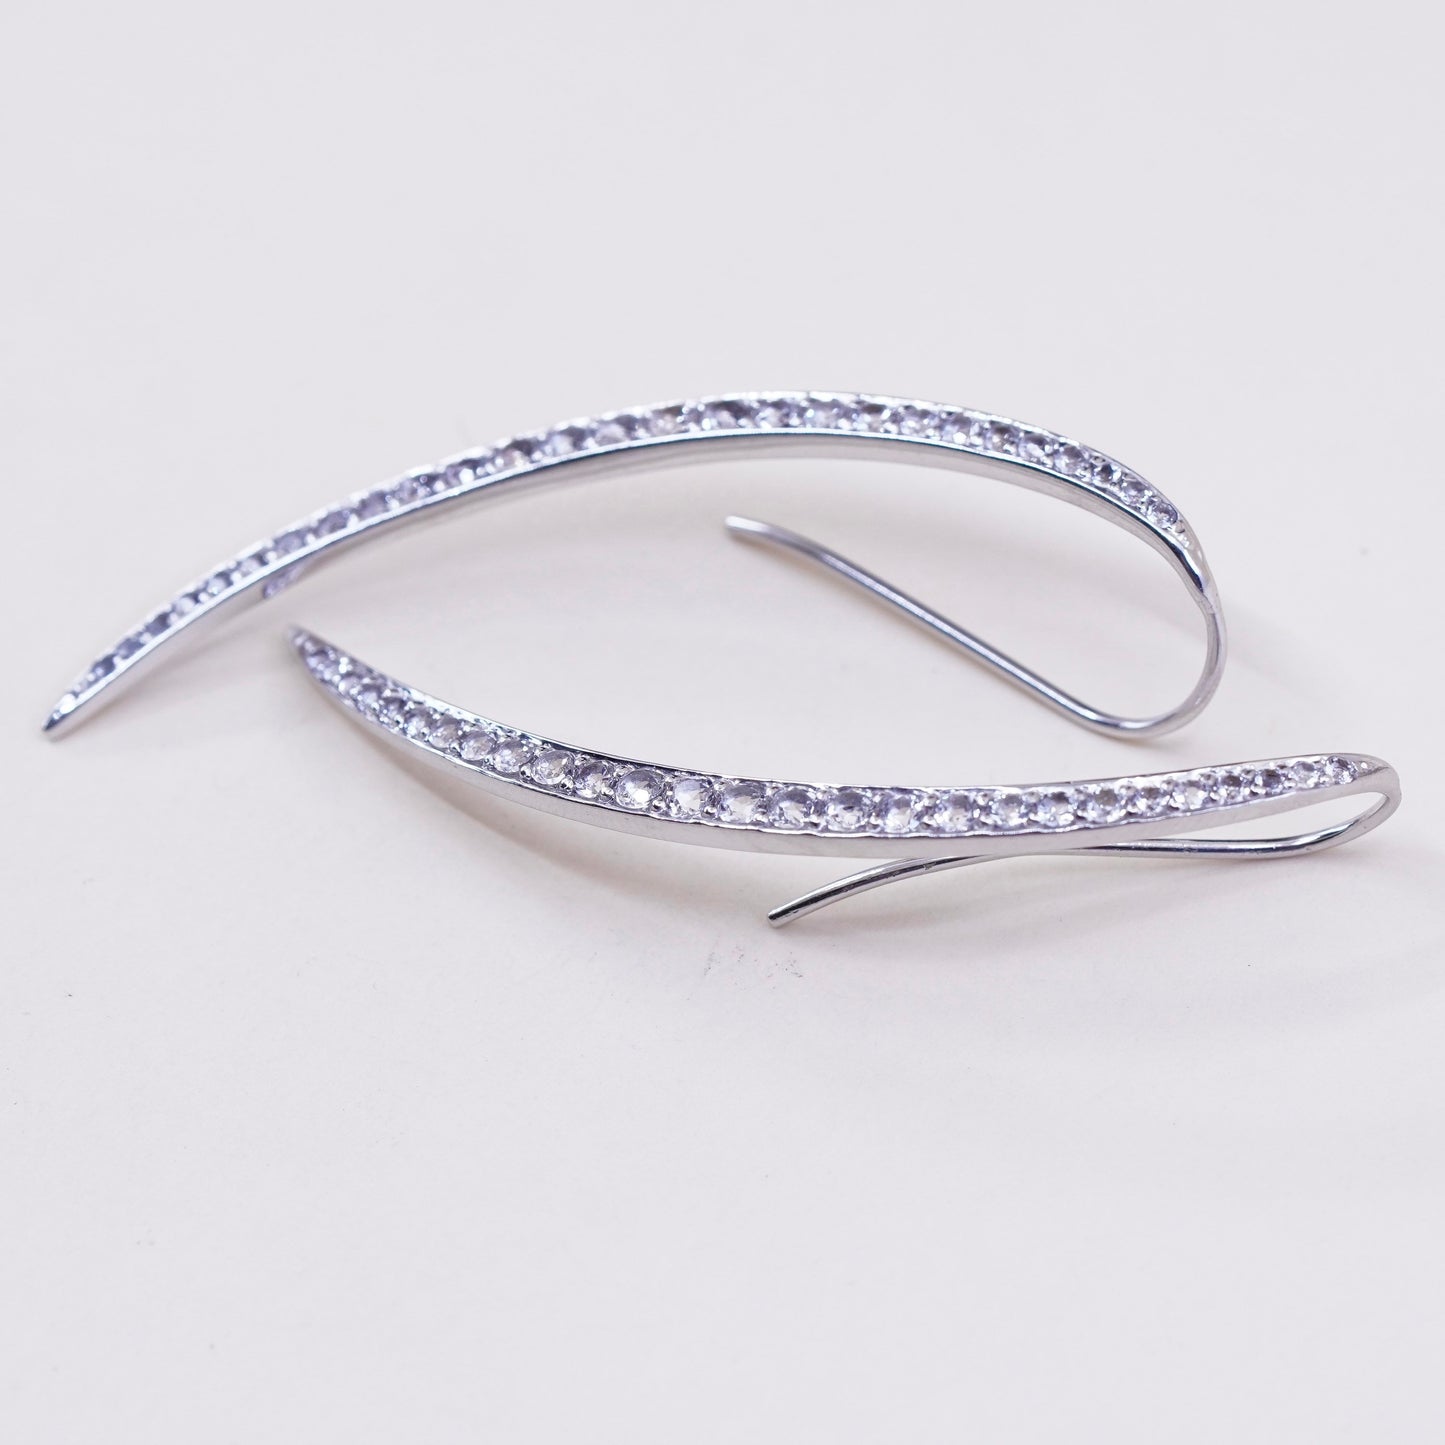 Vintage sterling silver extra long earrings, modern 925 silver curve with Cz